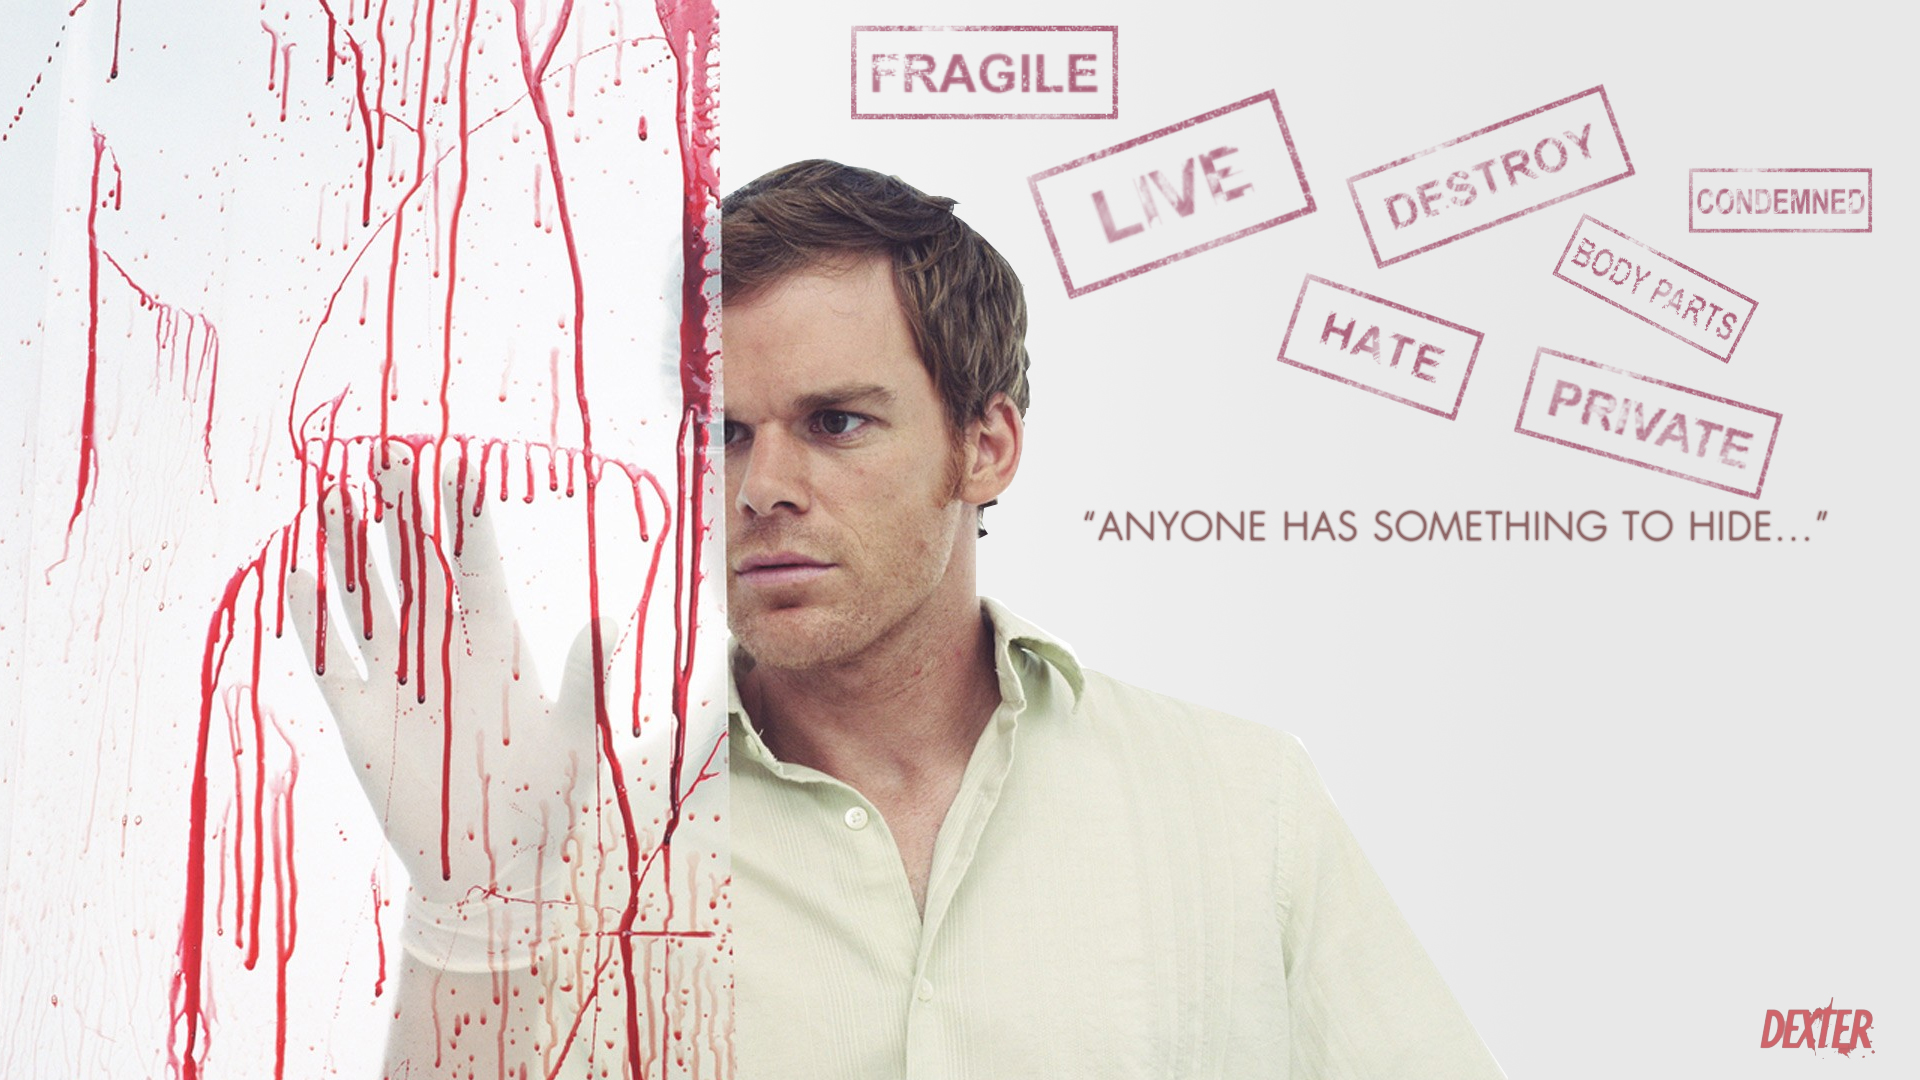 120+ Dexter HD Wallpapers and Backgrounds